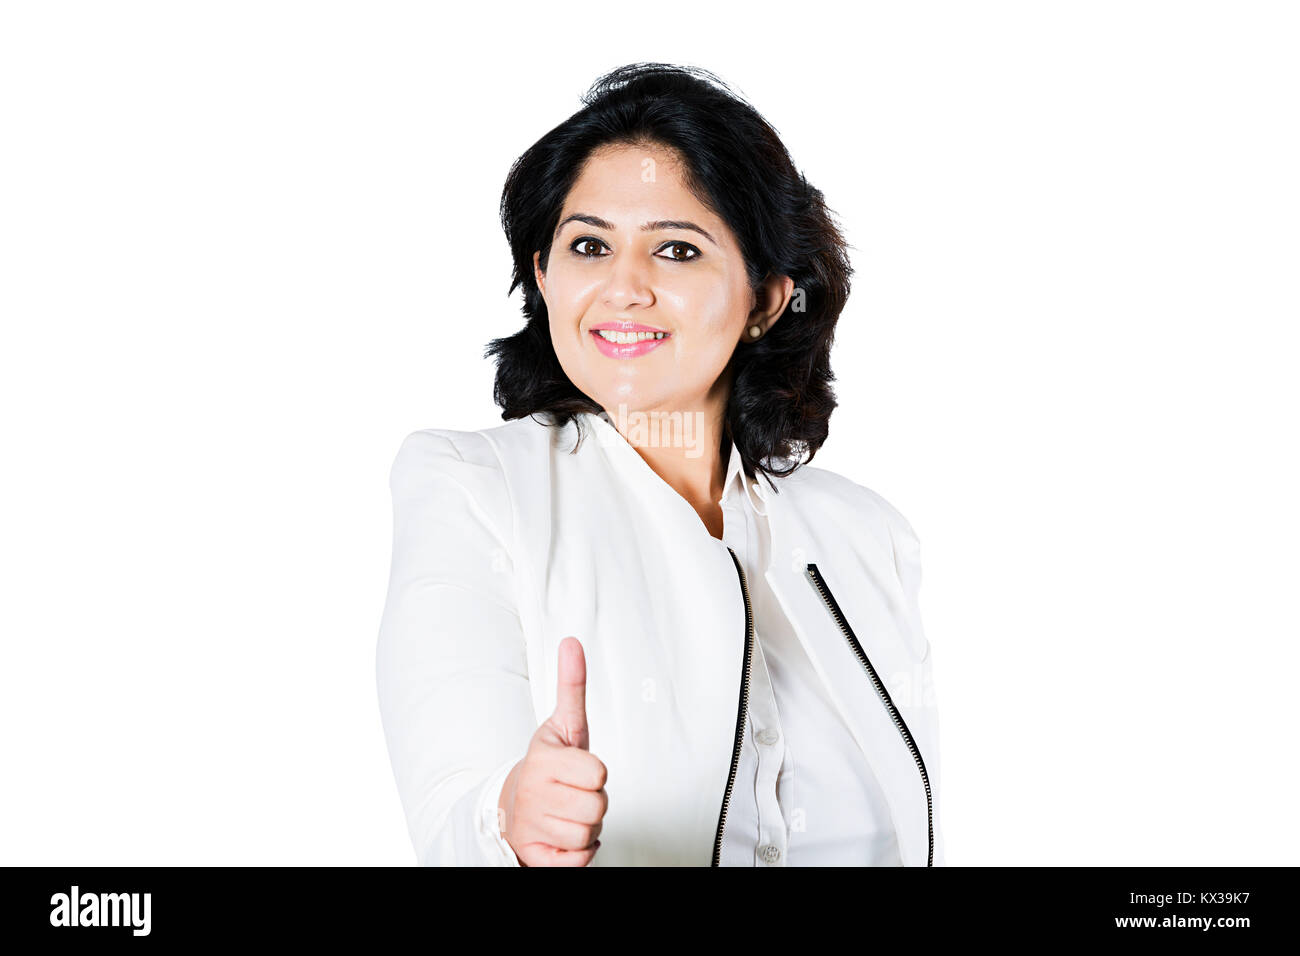 Indian Business Woman Employer Showing Thumbs up Success Stock Photo